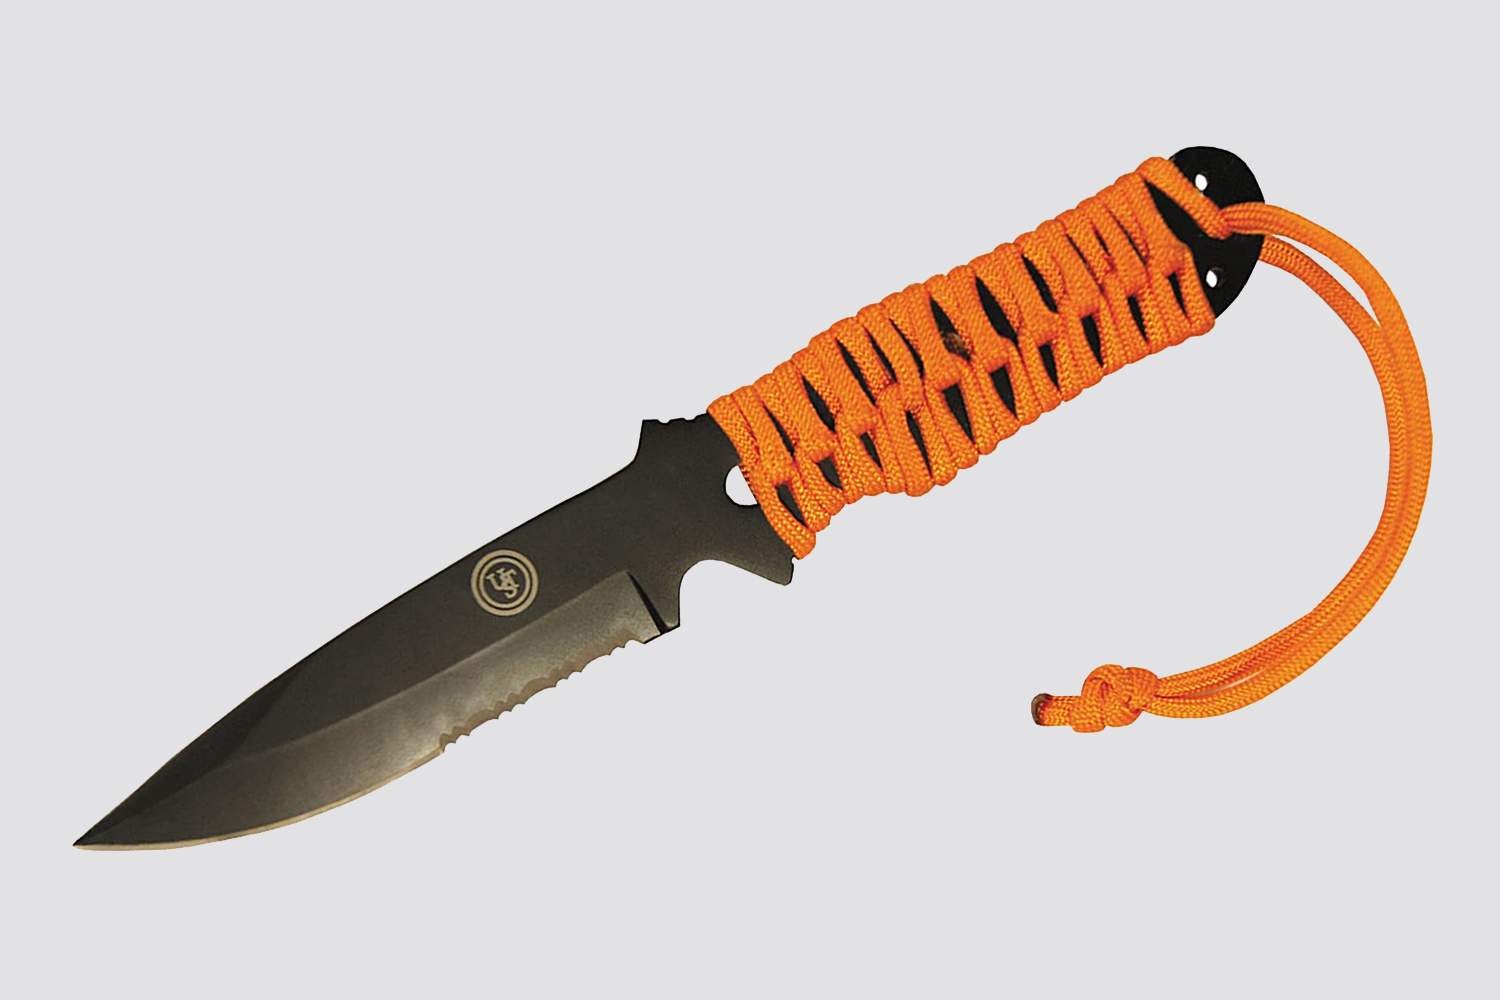 UST Full Tang ParaKnife FS 4.0 with 4 Inch Serrated Blade, Paracord Lanyard and Fire Starter for Hiking, Backpacking, Camping and Outdoor Survival